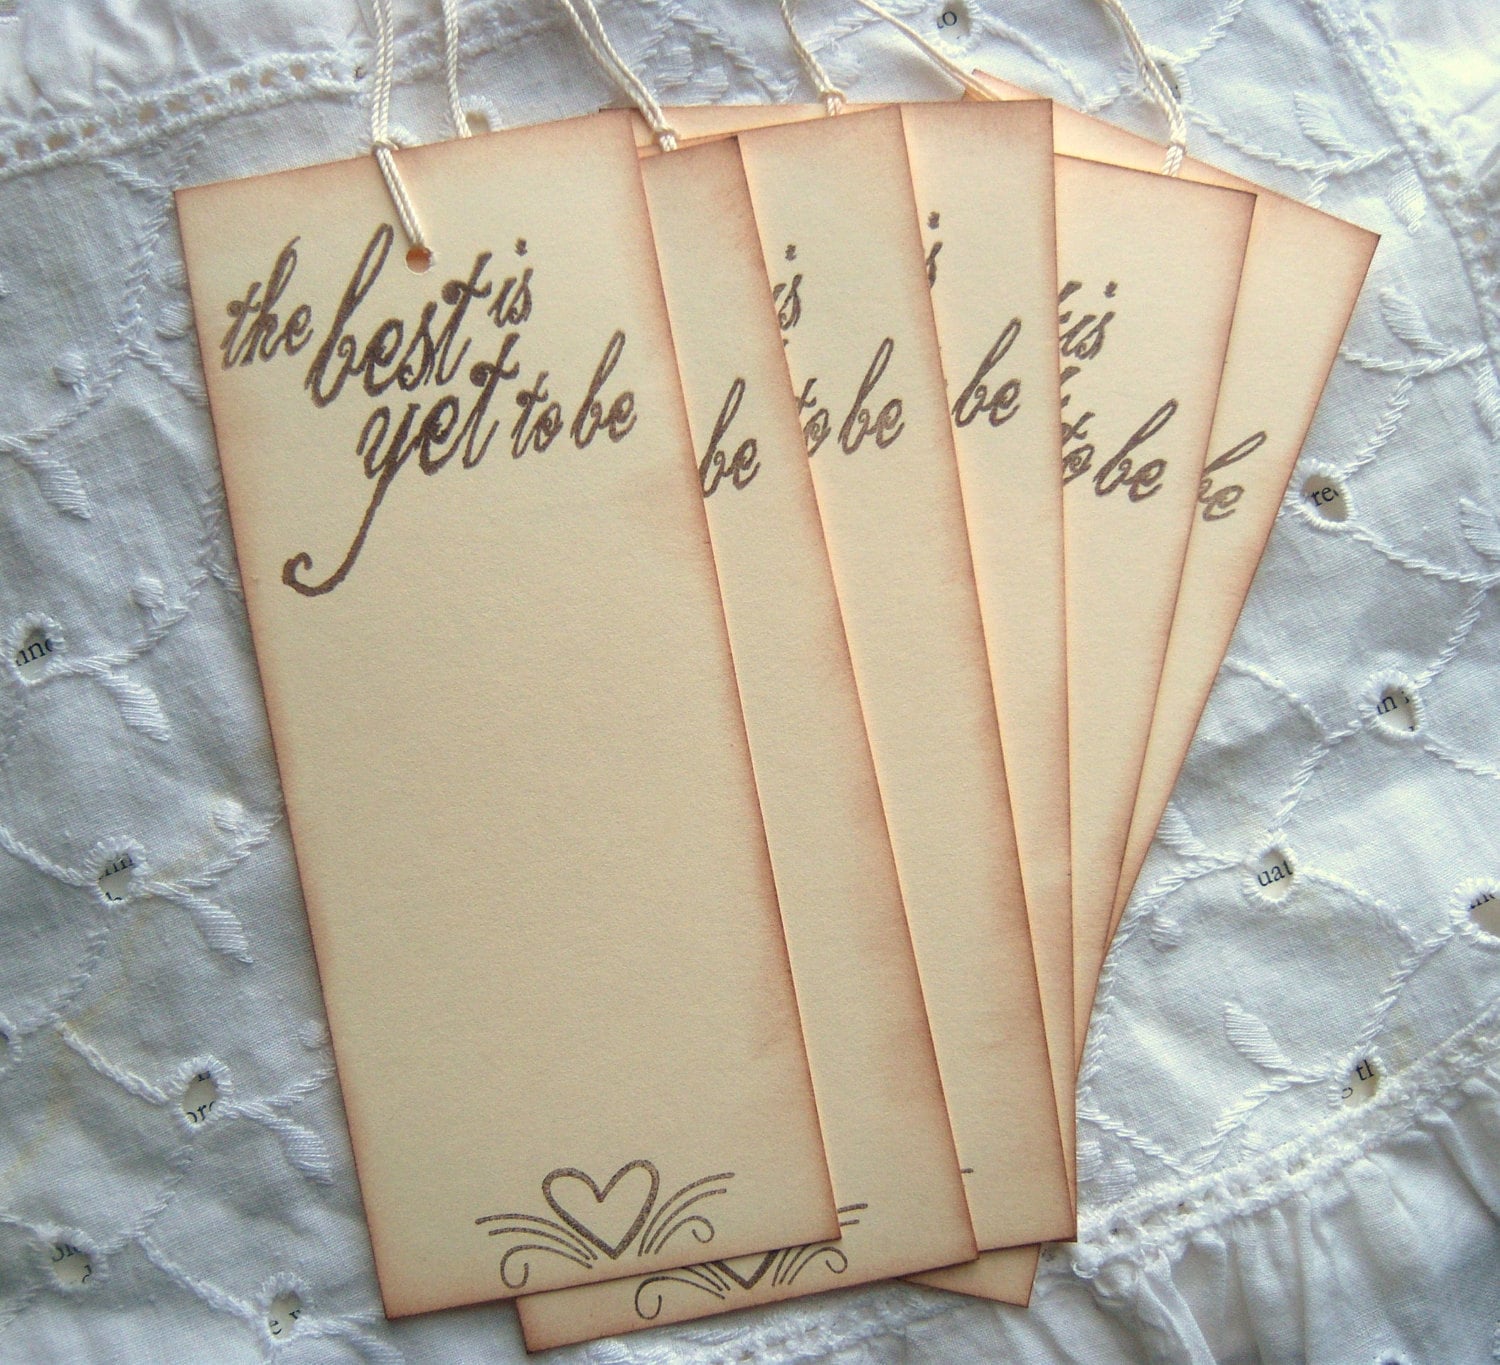 The Best is yet to be - Vintage inspired hang tags, wedding, romance, love